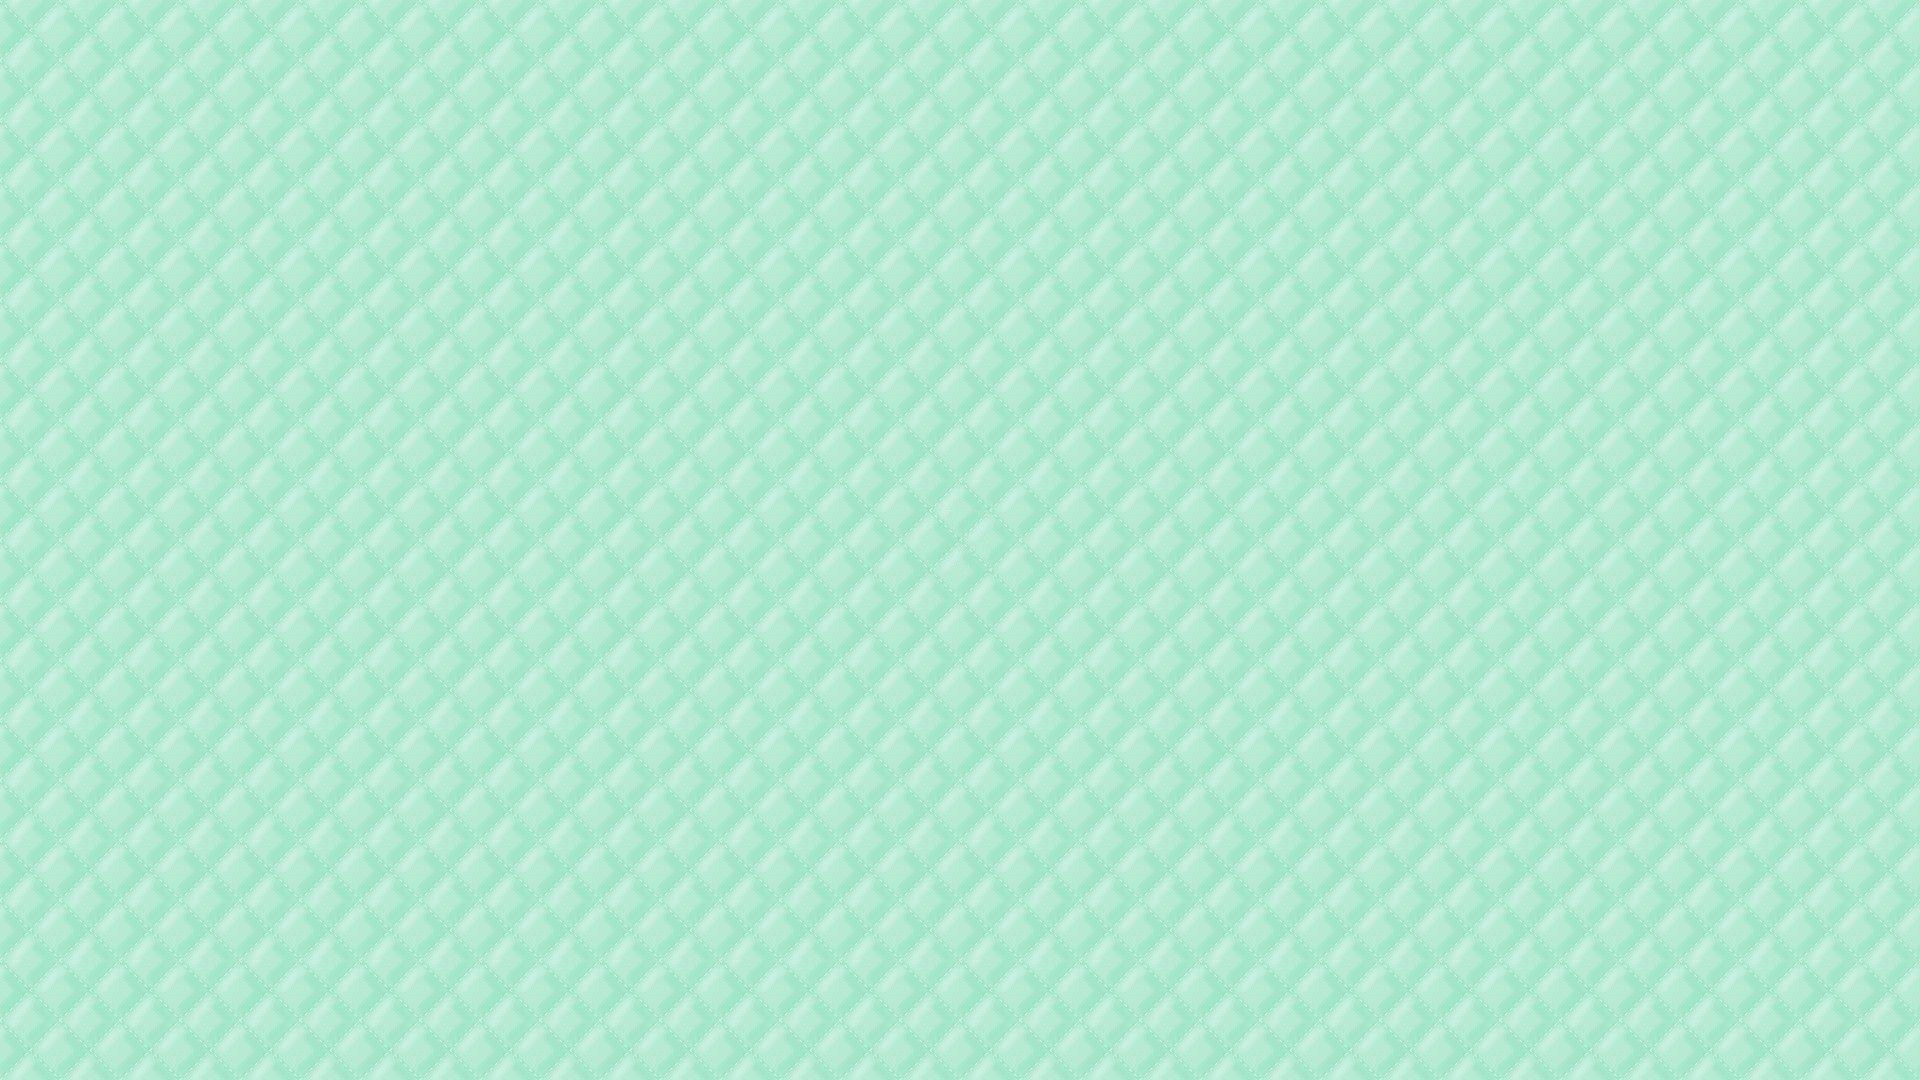 Mint Aesthetic Laptop Wallpapers - Top Free Mint Aesthetic Laptop